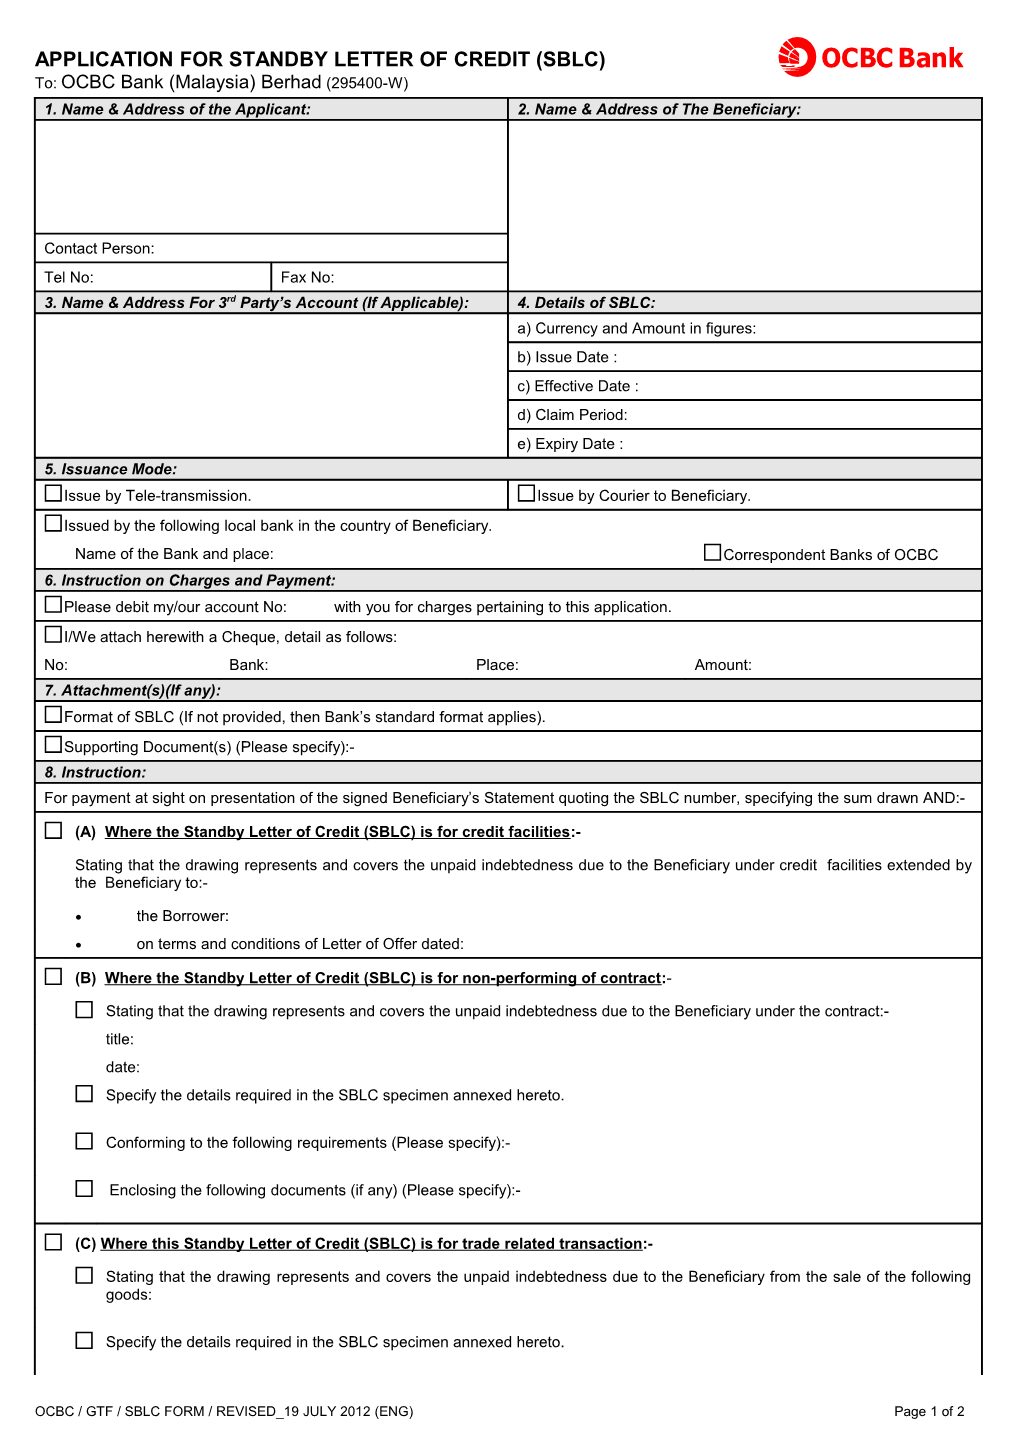 Application for Standby Letter of Credit